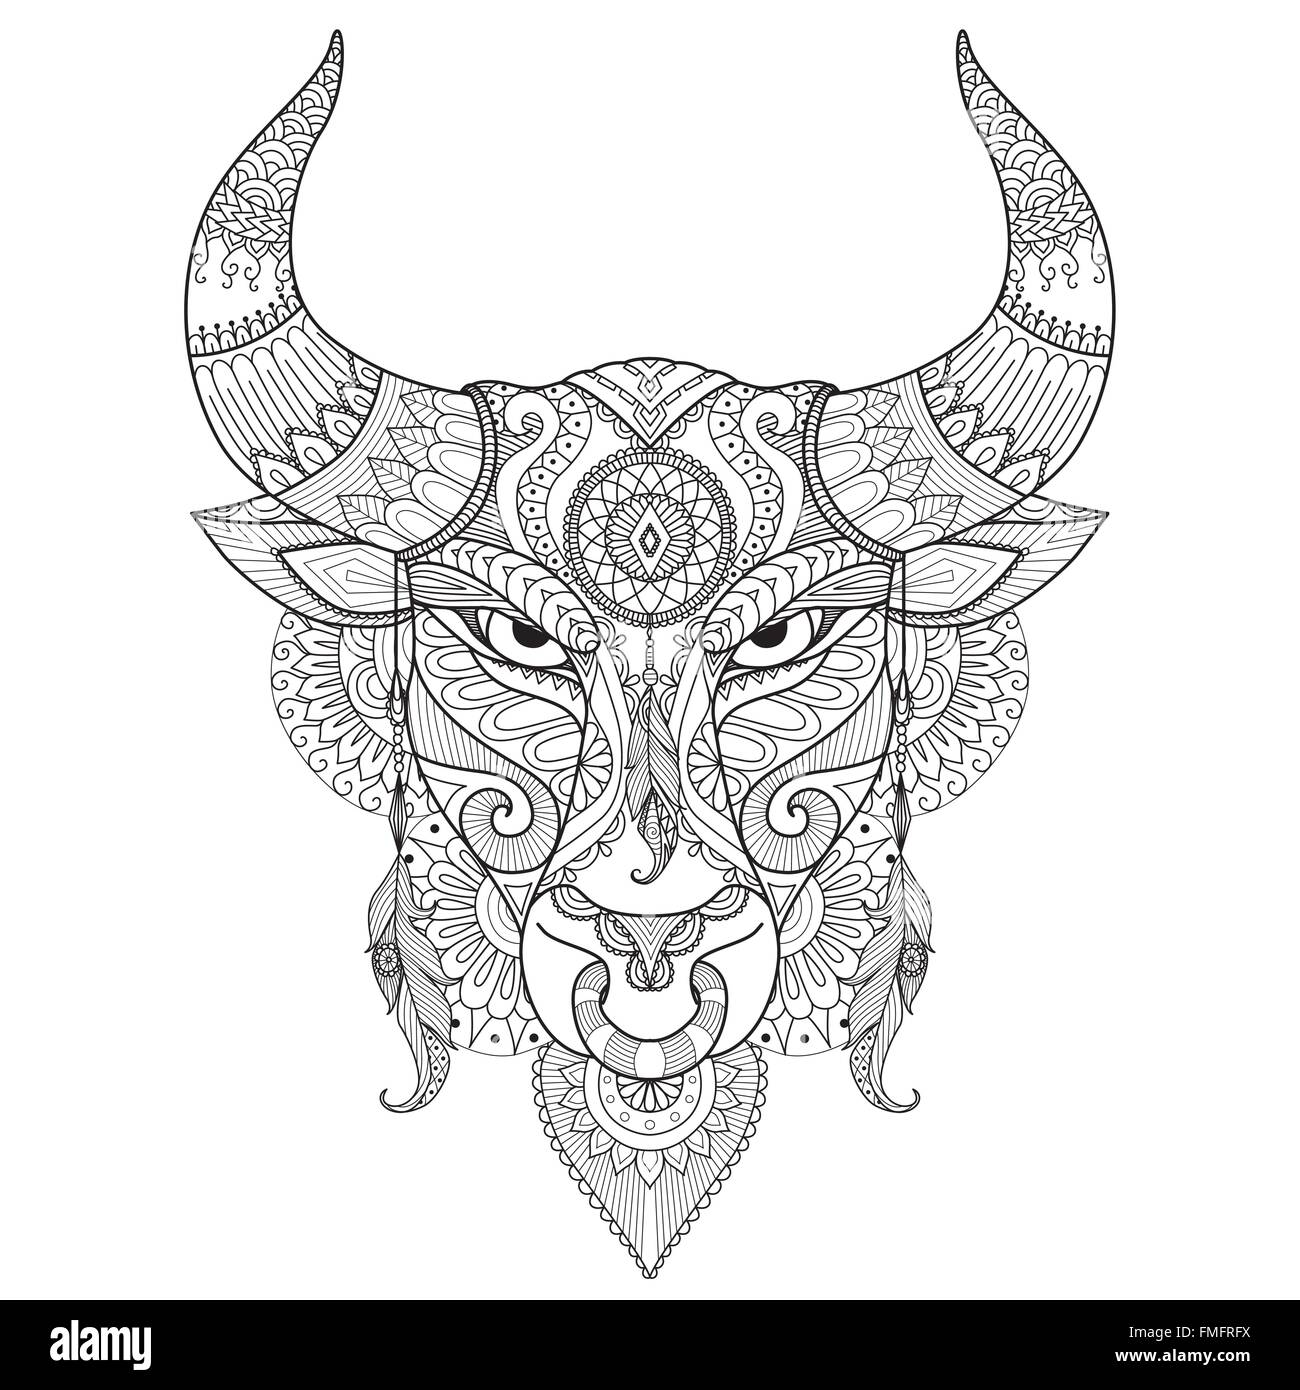 Bull Line Drawing coloring page